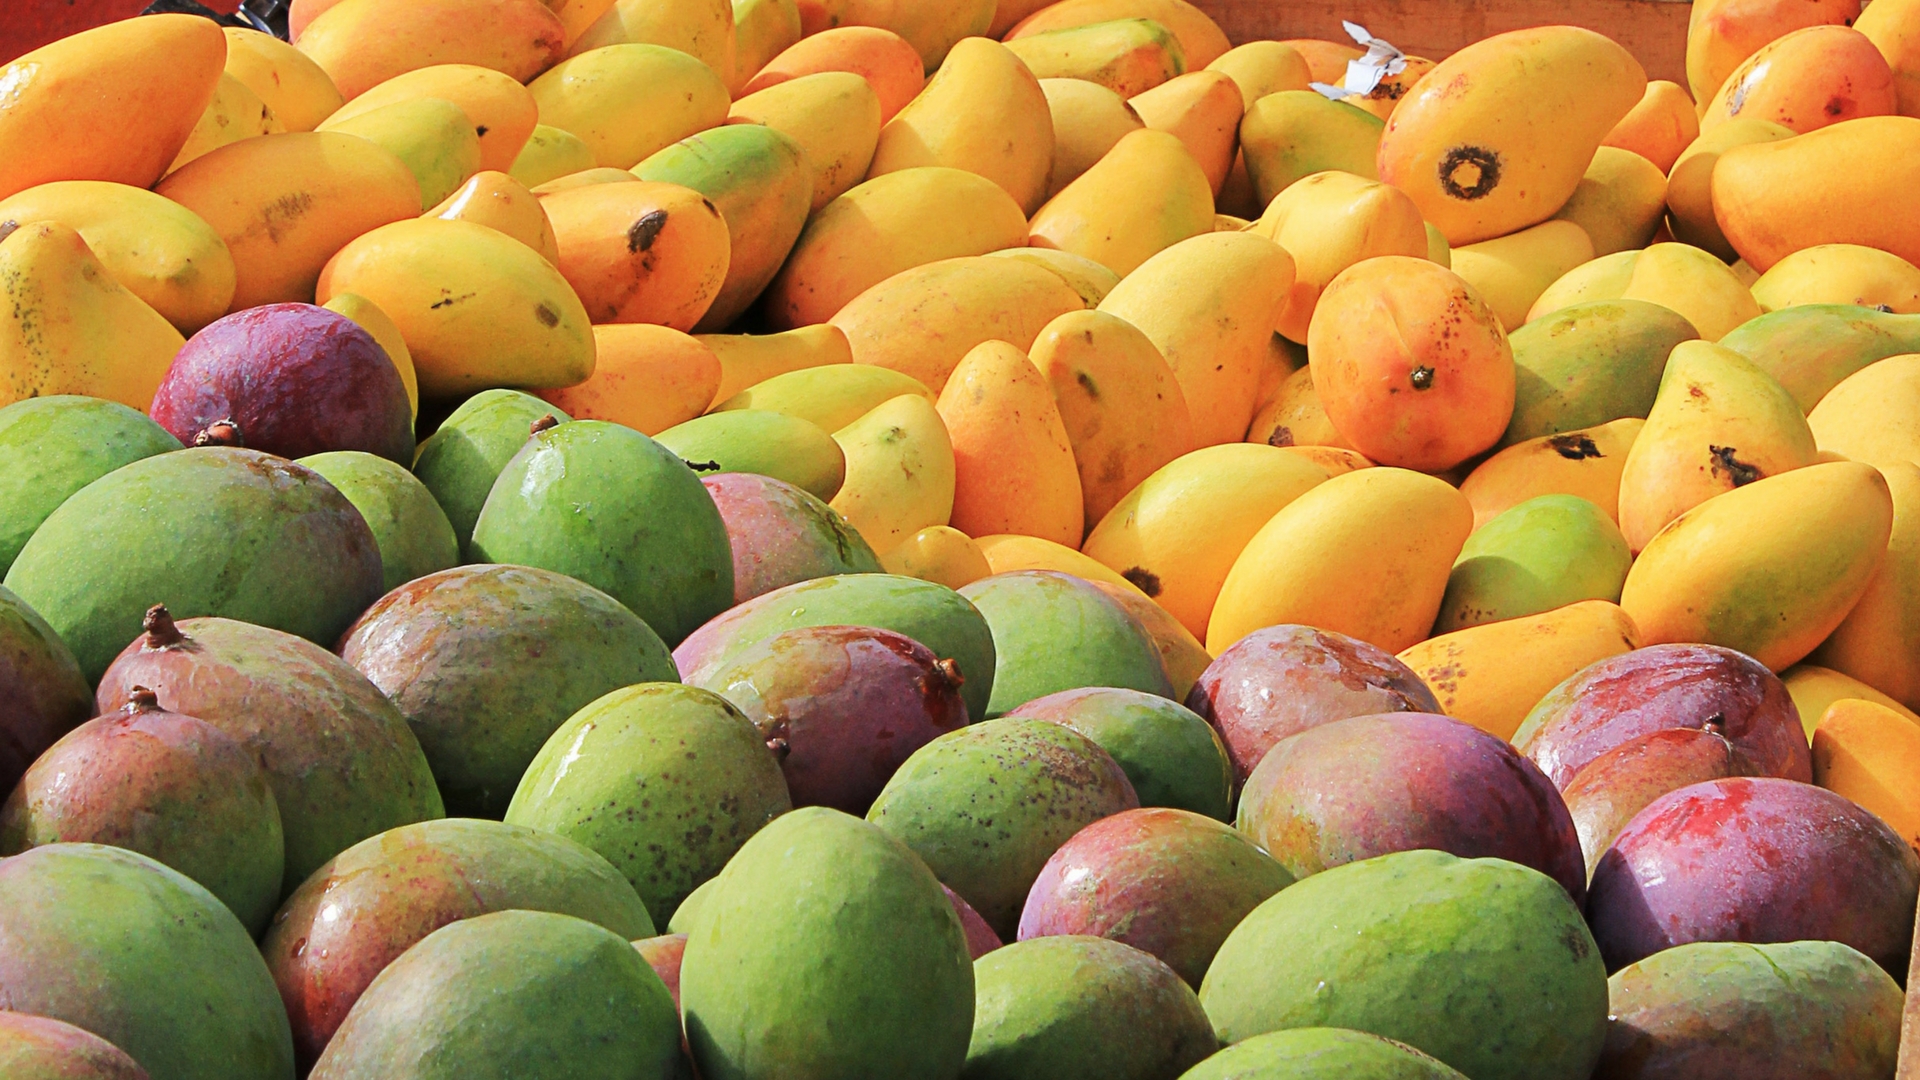 Mangoes: Are They Healthy?